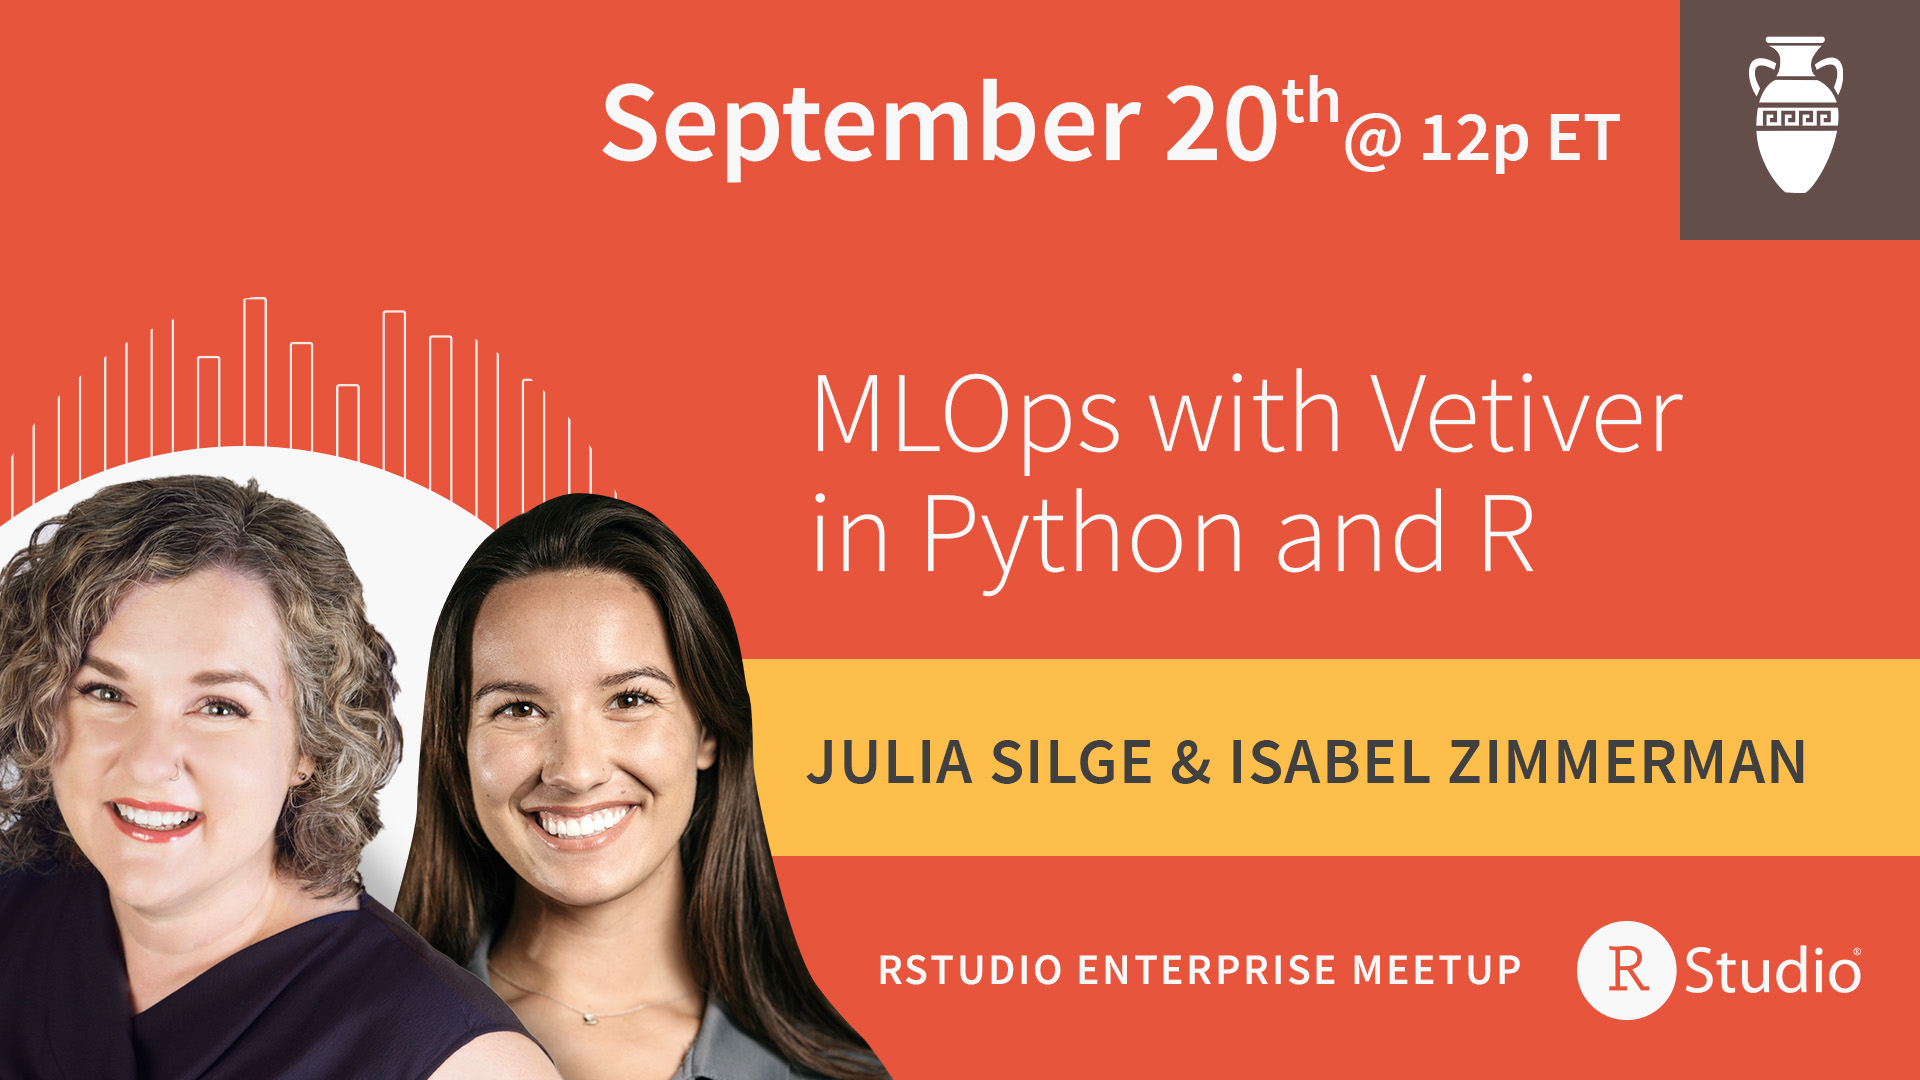 RStudio Enterprise Meetup information card for MLOPs with vetiver in Python and R